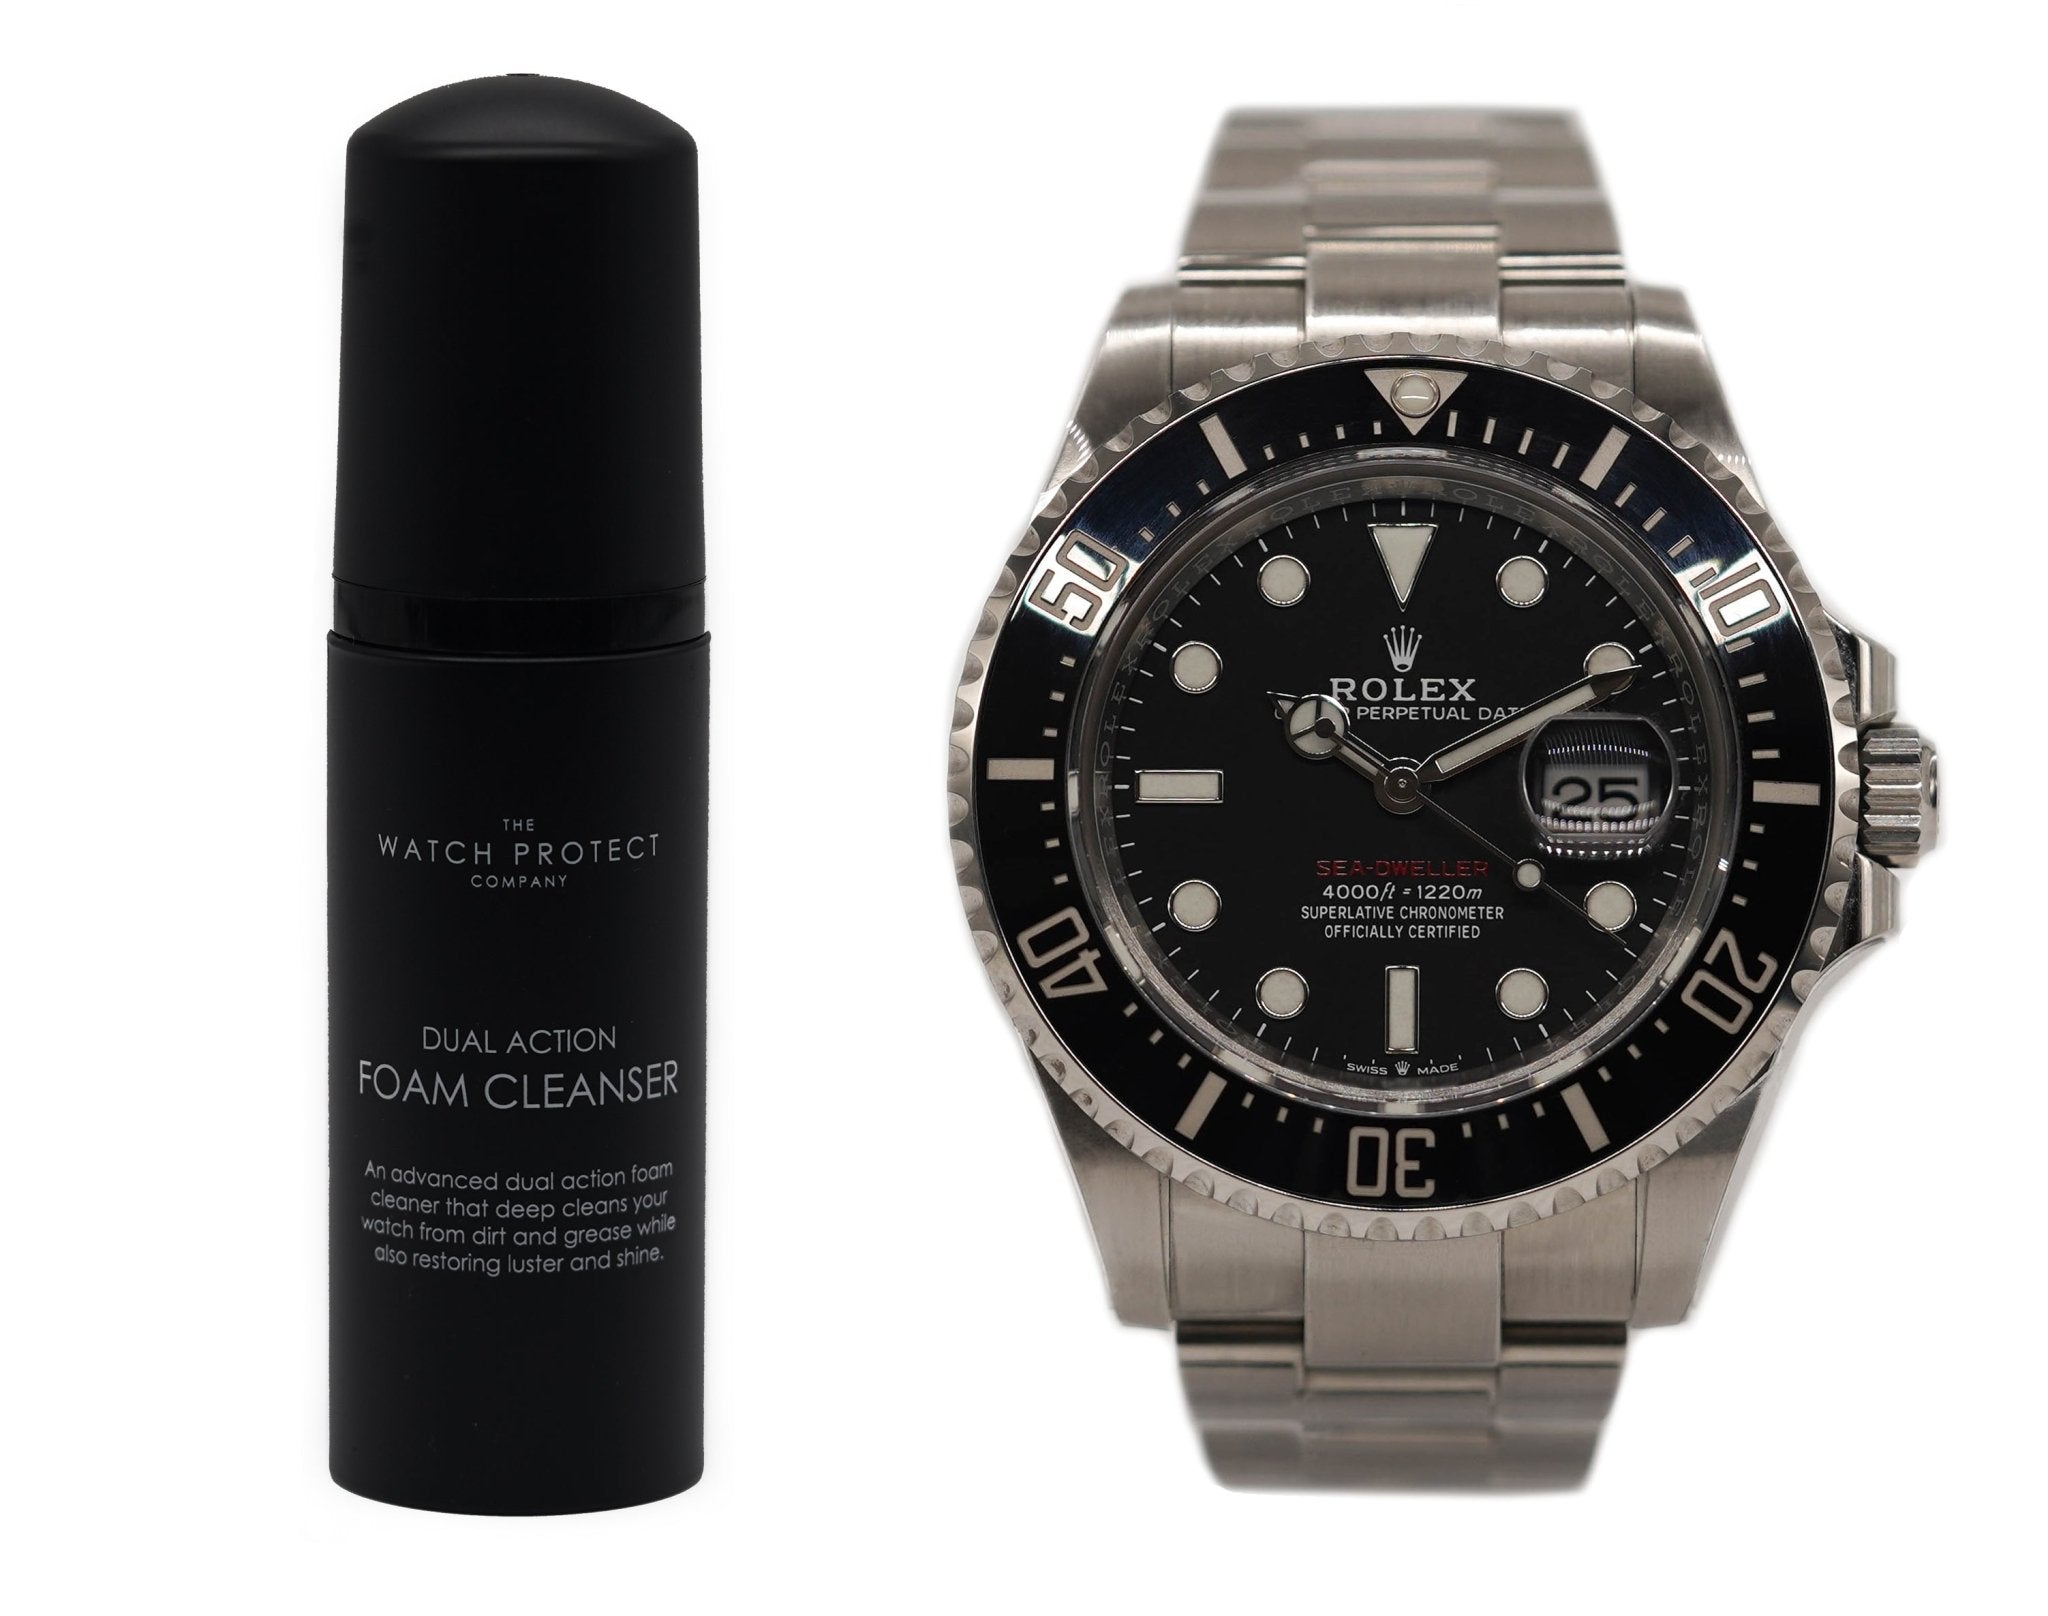 DUAL ACTION FOAM CLEANER & ROLEX SEA DWELLER 126600 - TIER 3 - WATCH PROTECTION KIT BUNDLE - The Watch Protect Company